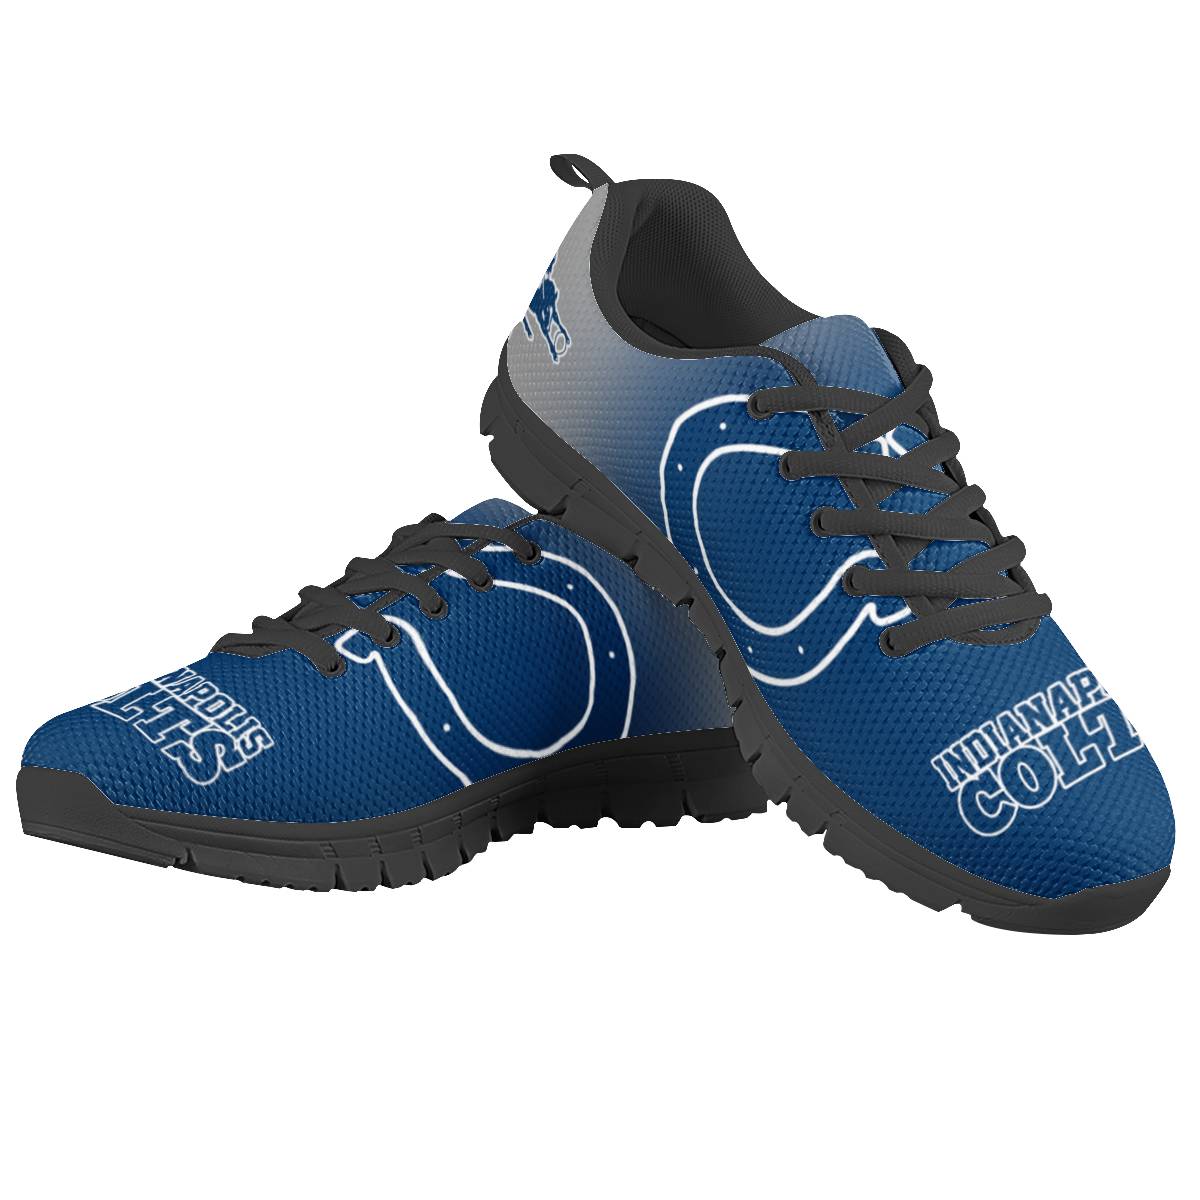 Women's Indianapolis Colts AQ Running Shoes 002